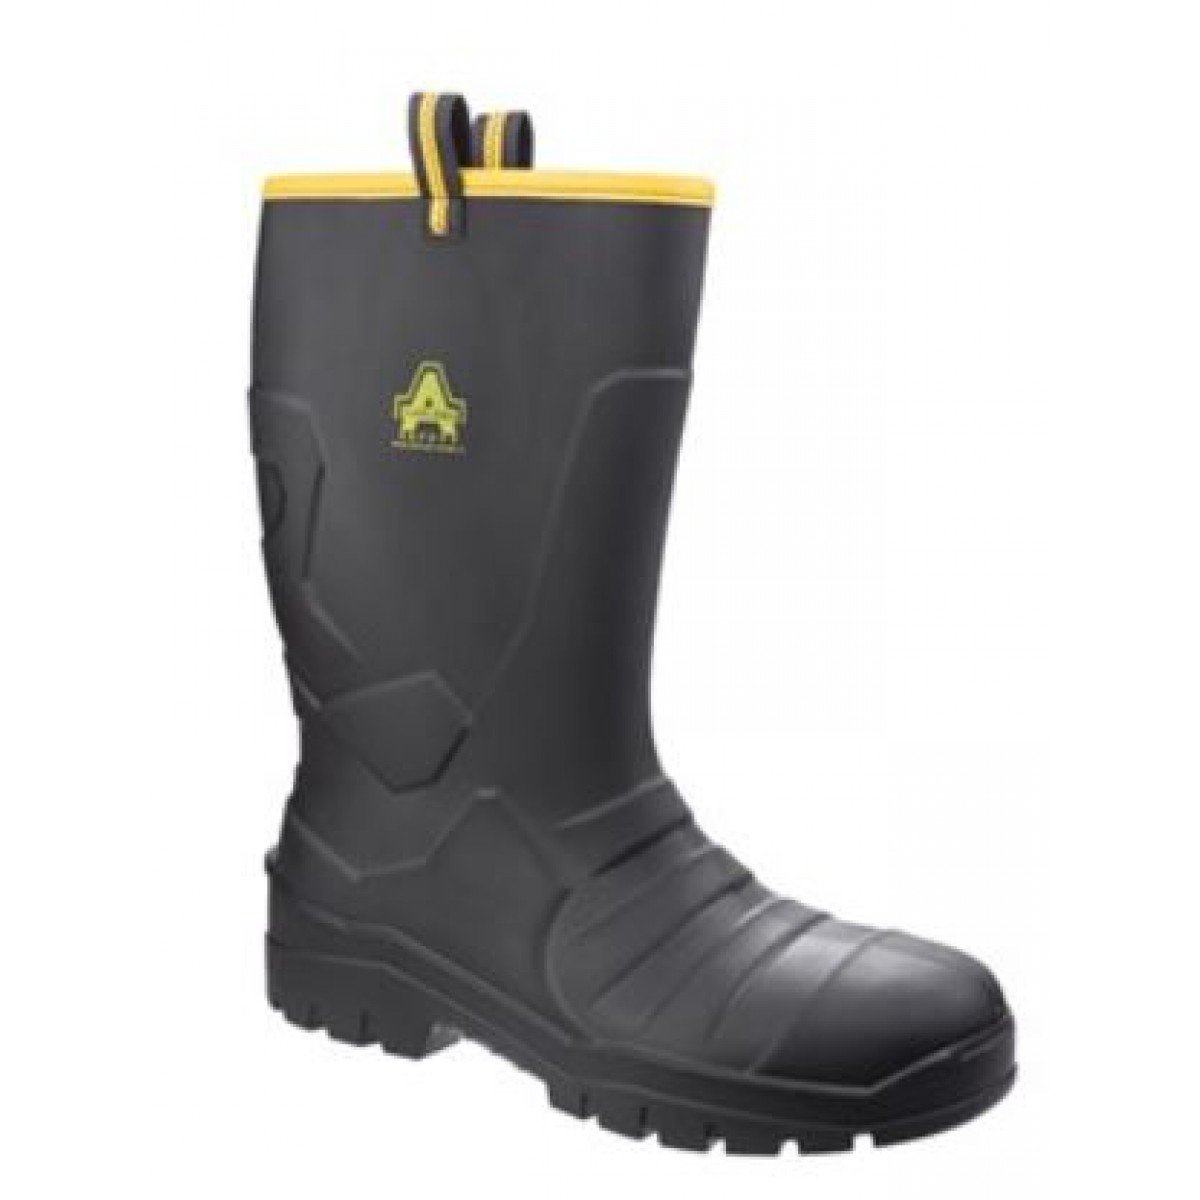 AS1008 Amblers Safety Rigger Boot S5 SRC